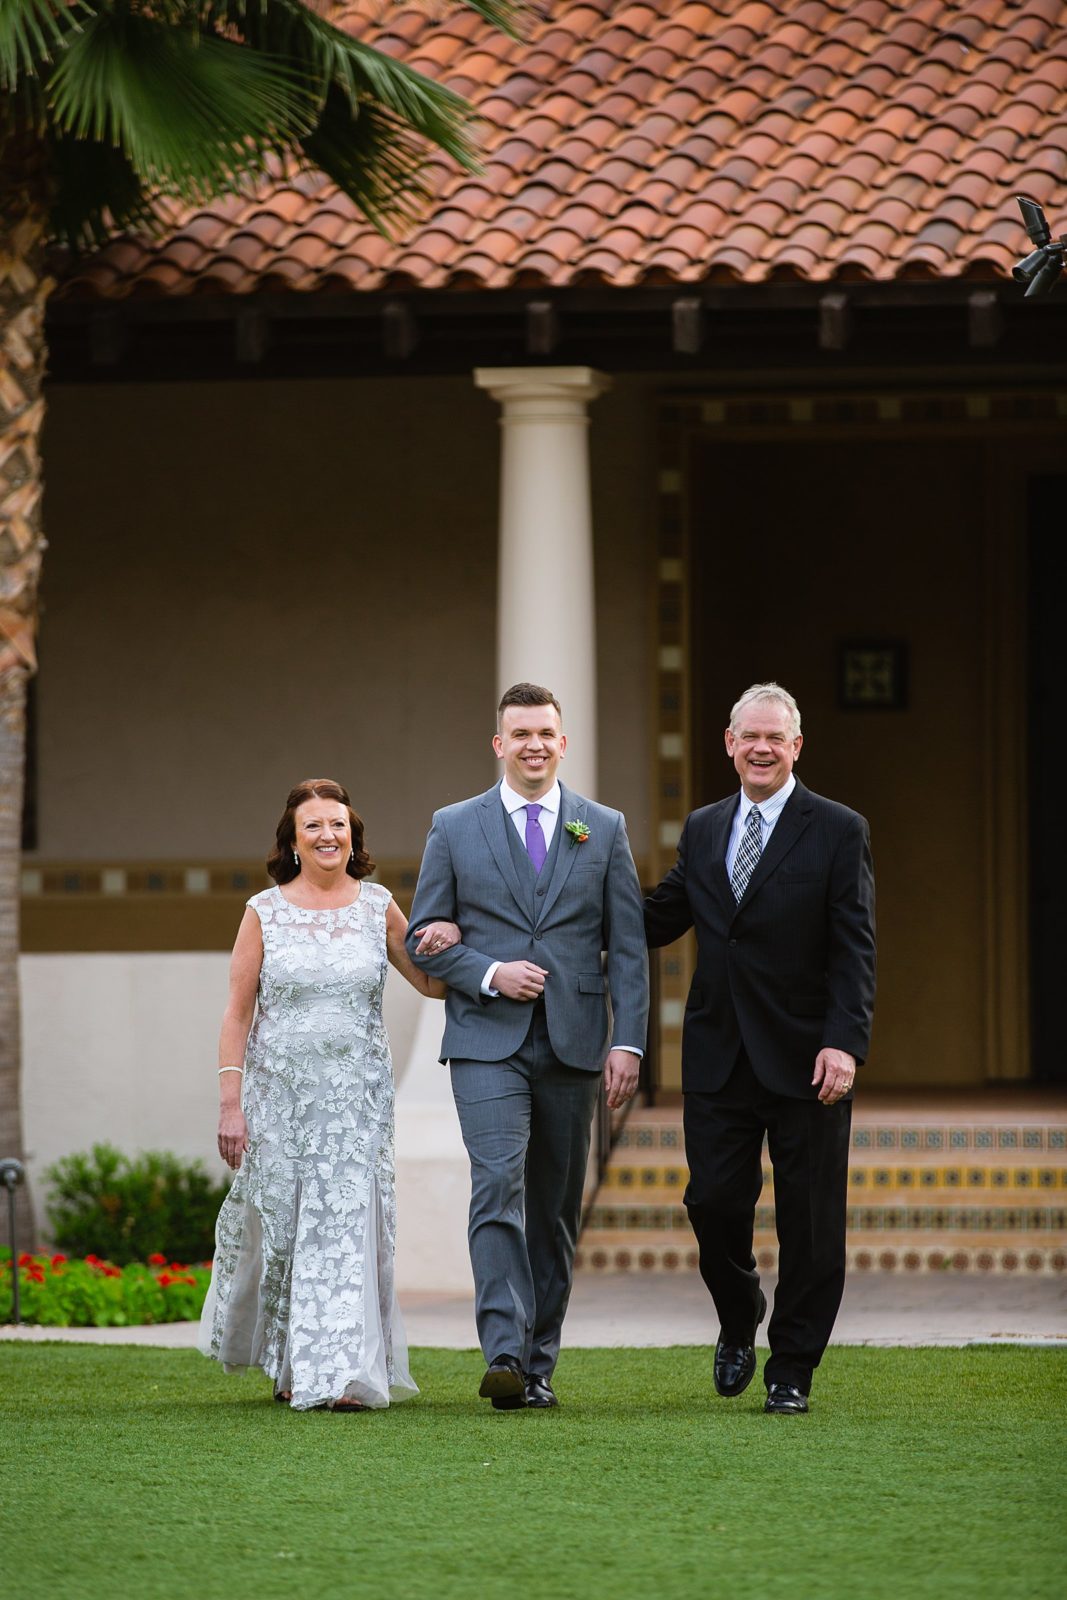 Groom walking down the aisle with his parents during The Scottsdale Resort at McCormick Ranch wedding ceremony by Arizona wedding photographer PMA Photography.